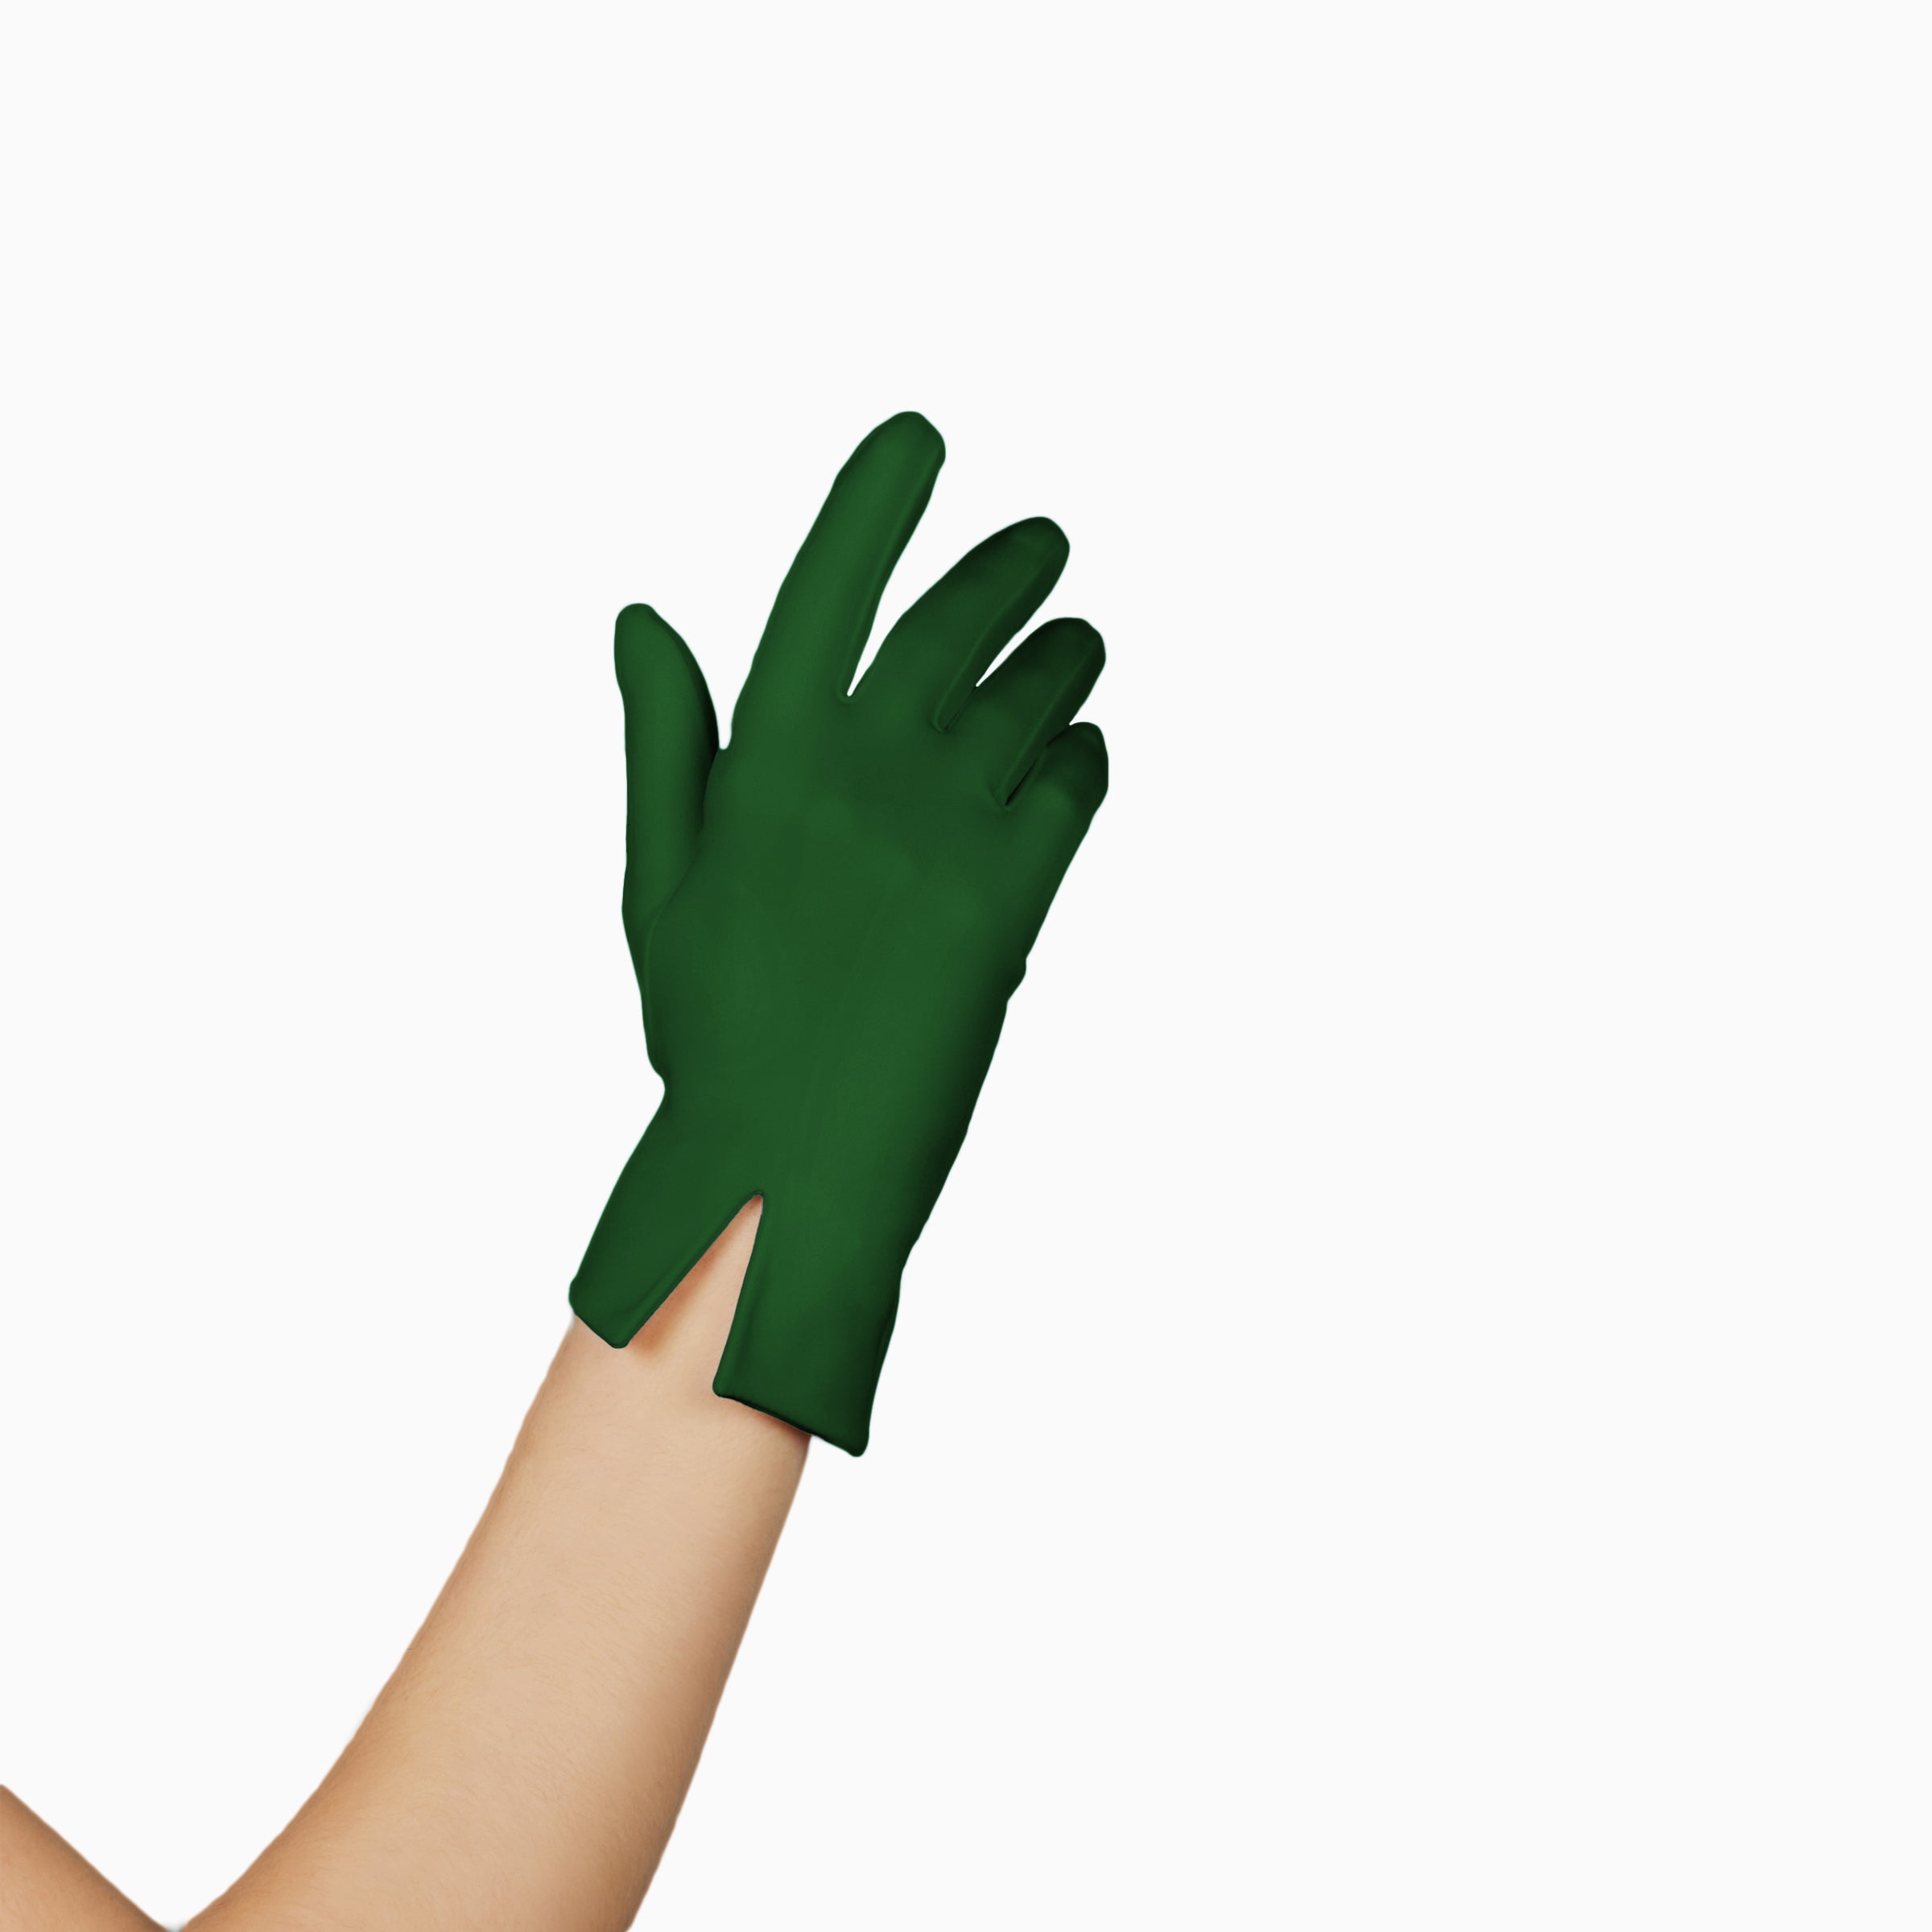 A woman spreading holiday cheer with THE ISABELLE - Green Day Glove - Holiday Edition gloves adorned with touchscreen index fingers by LadyFinch.